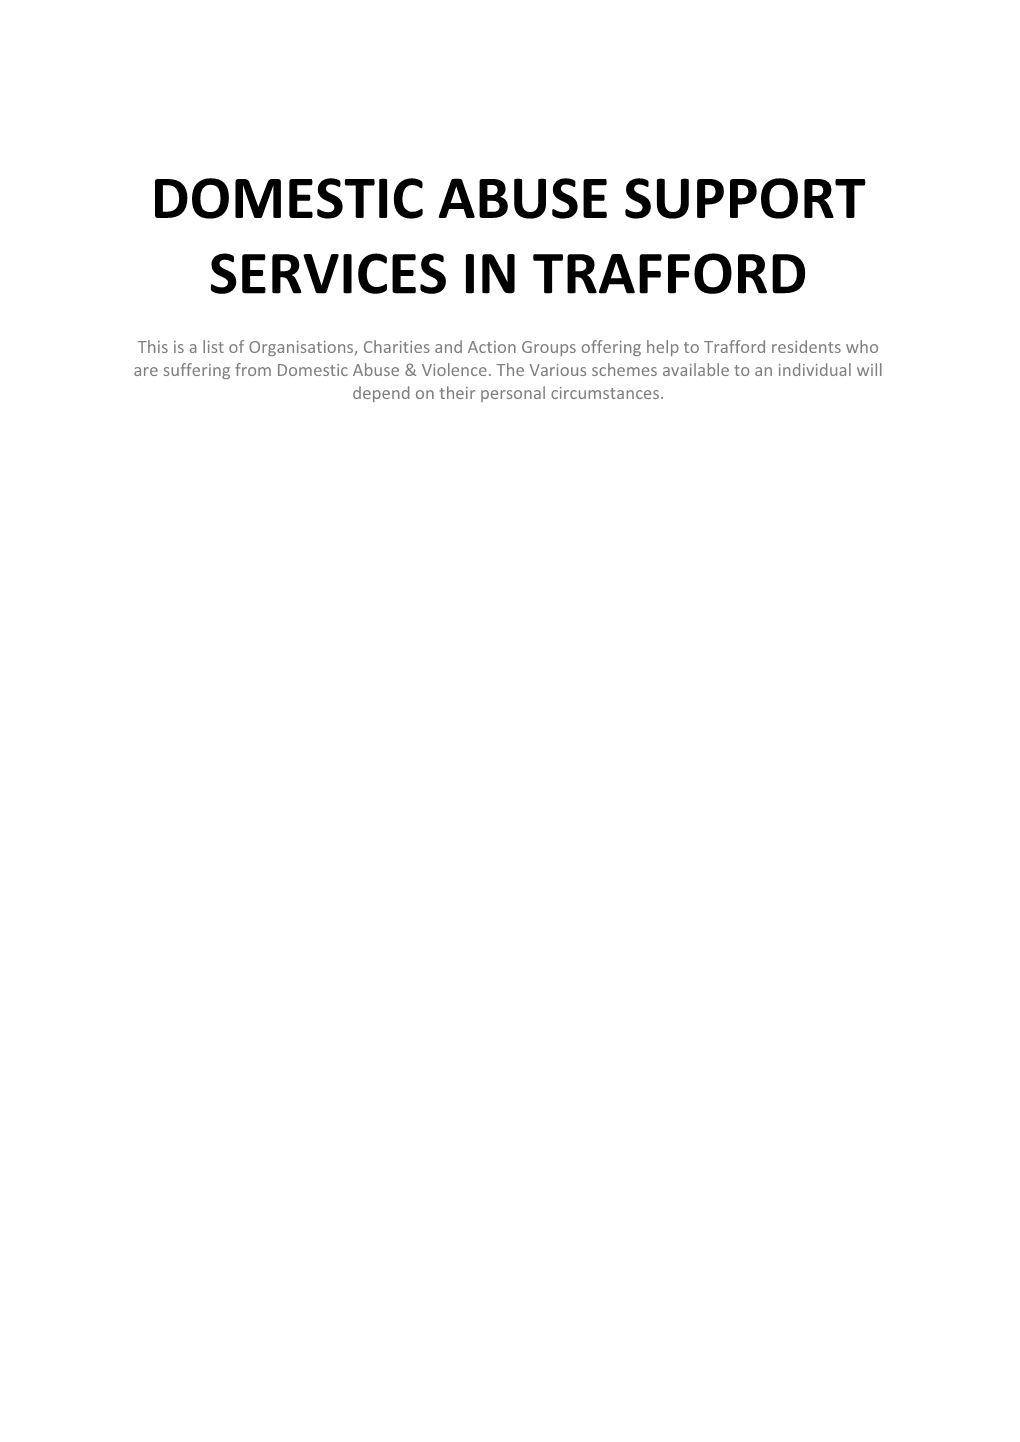 Domestic Abuse Support Services in Trafford